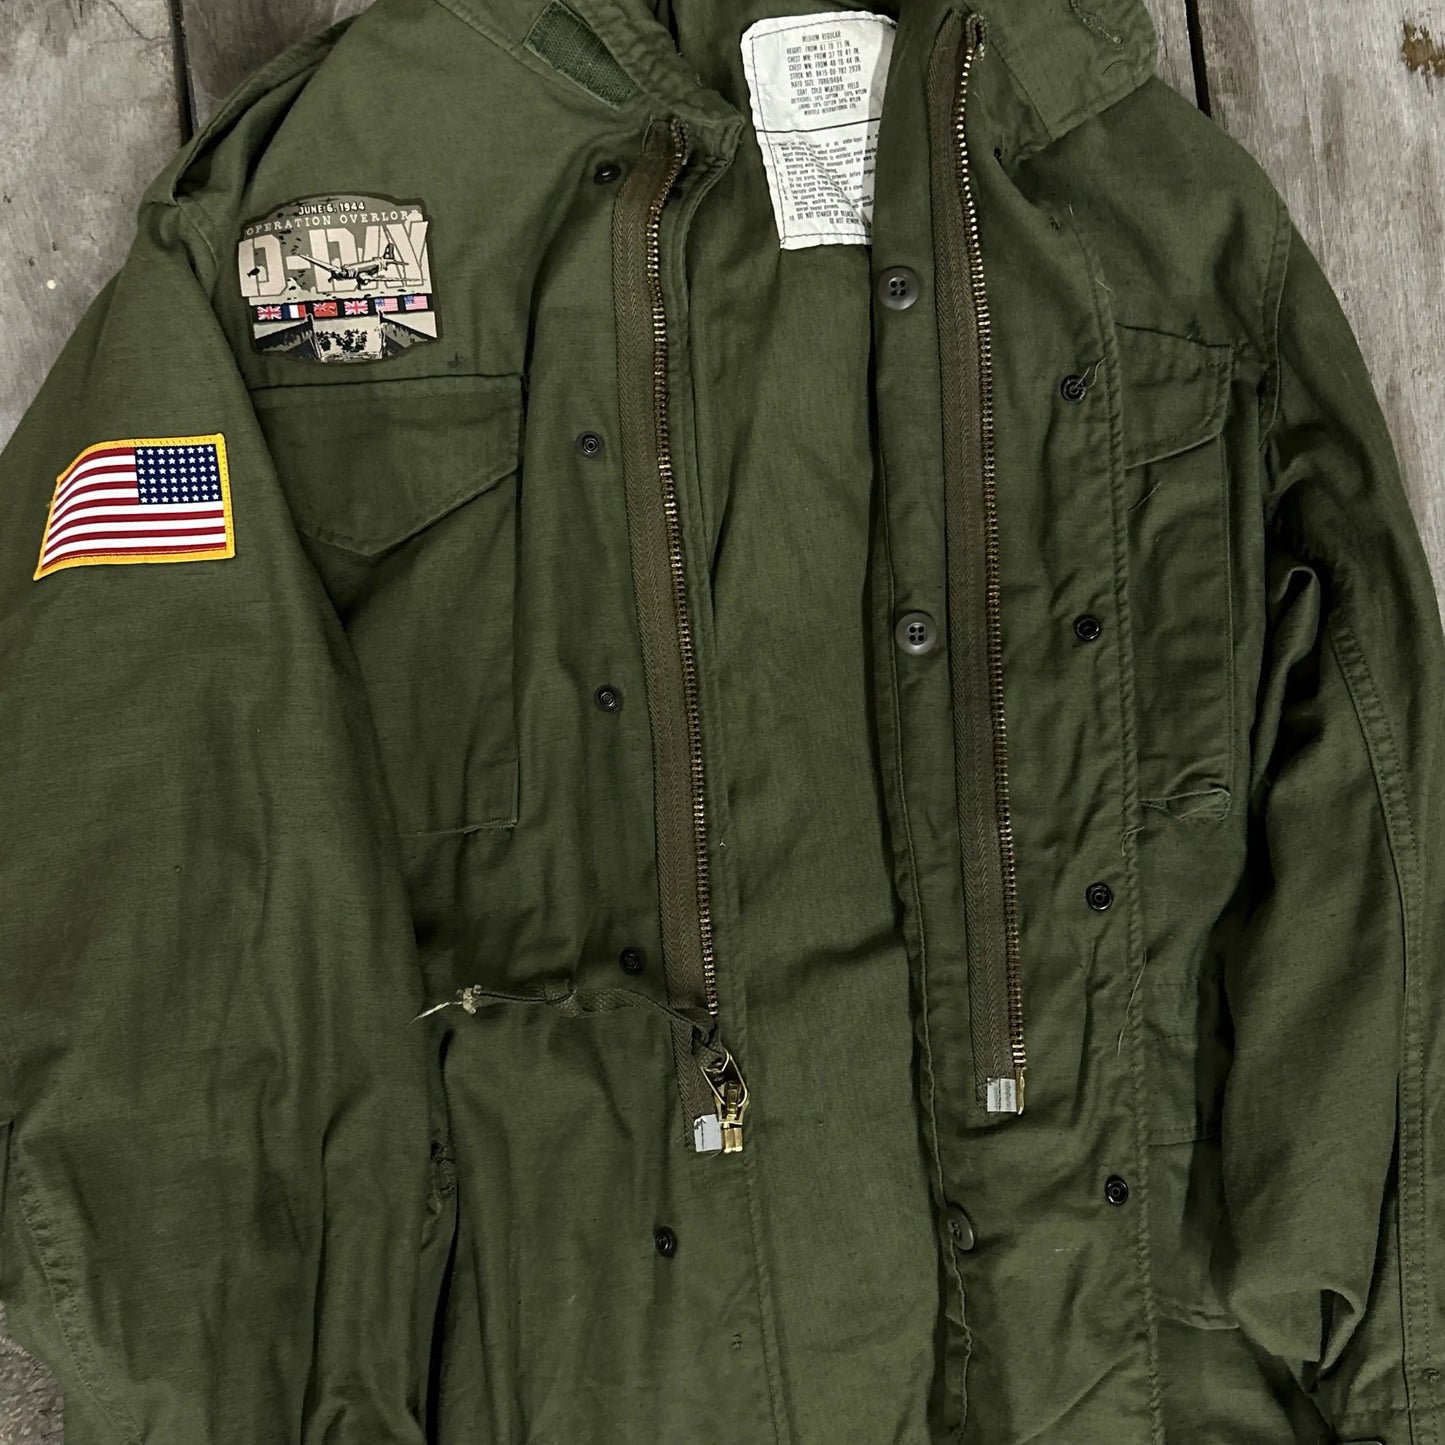 M65 Army field coats with original D-Day Operation Overlord design and a 48-star flag